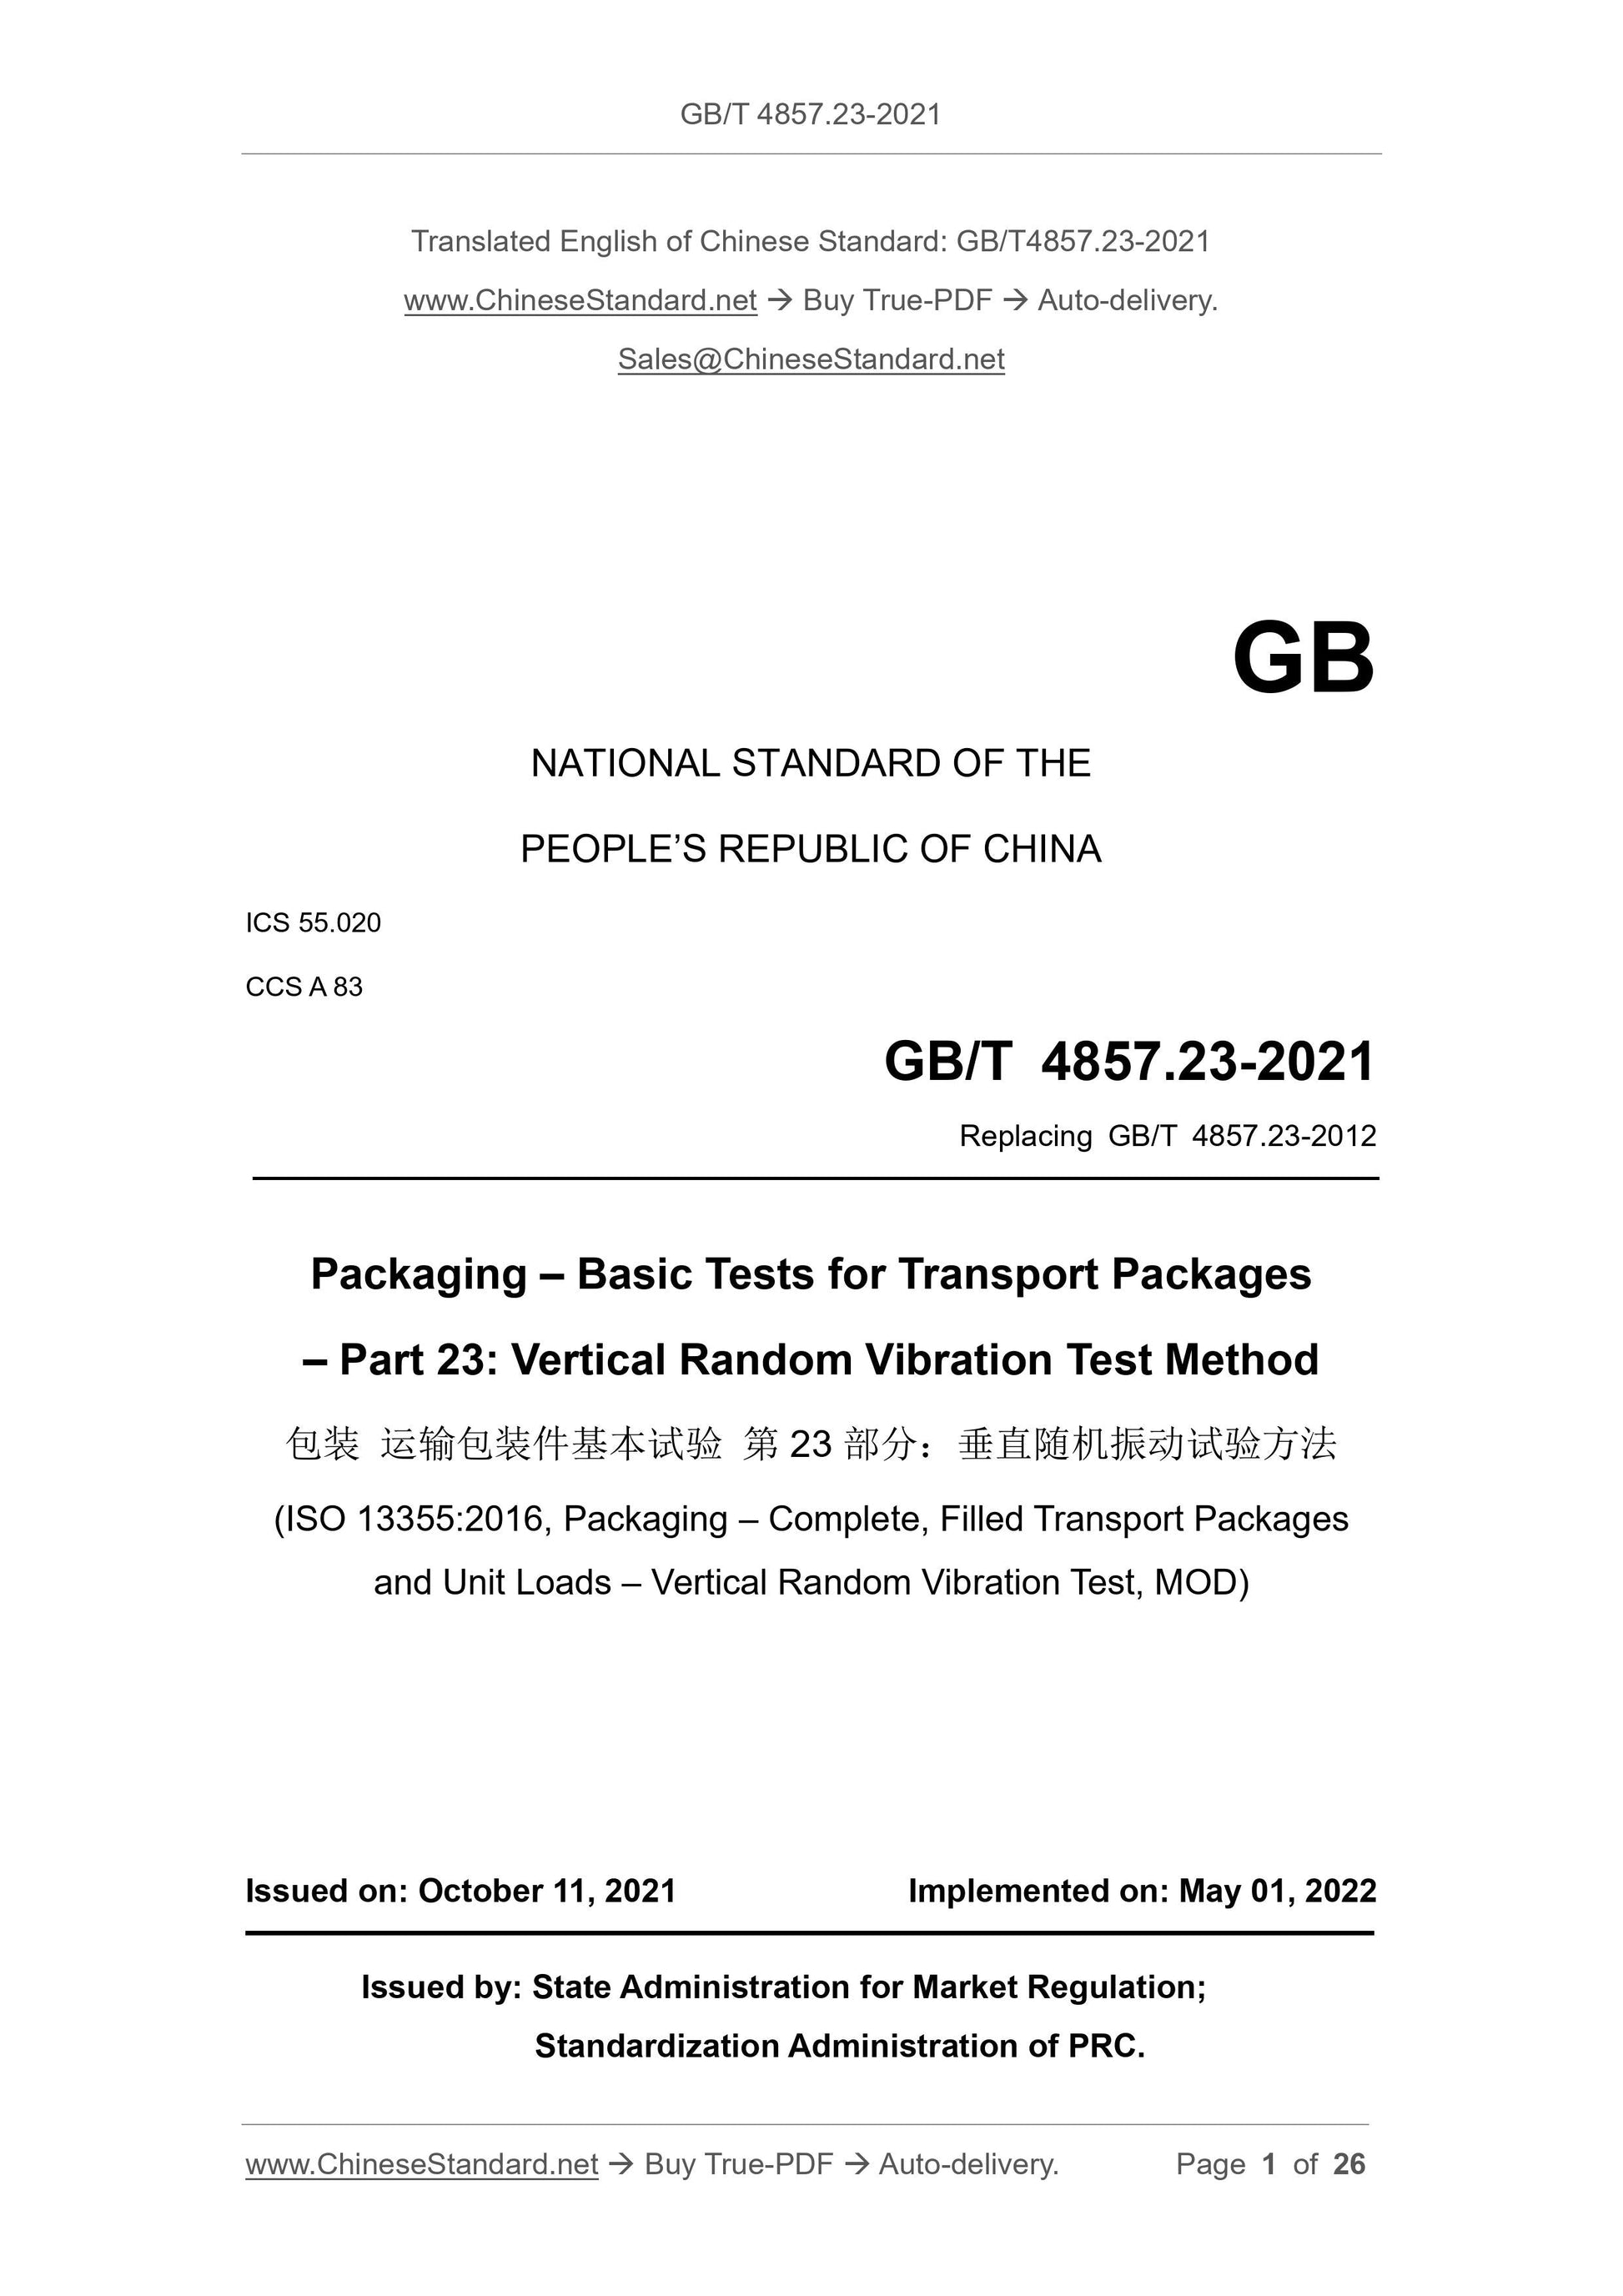 GB/T 4857.23-2021 Page 1